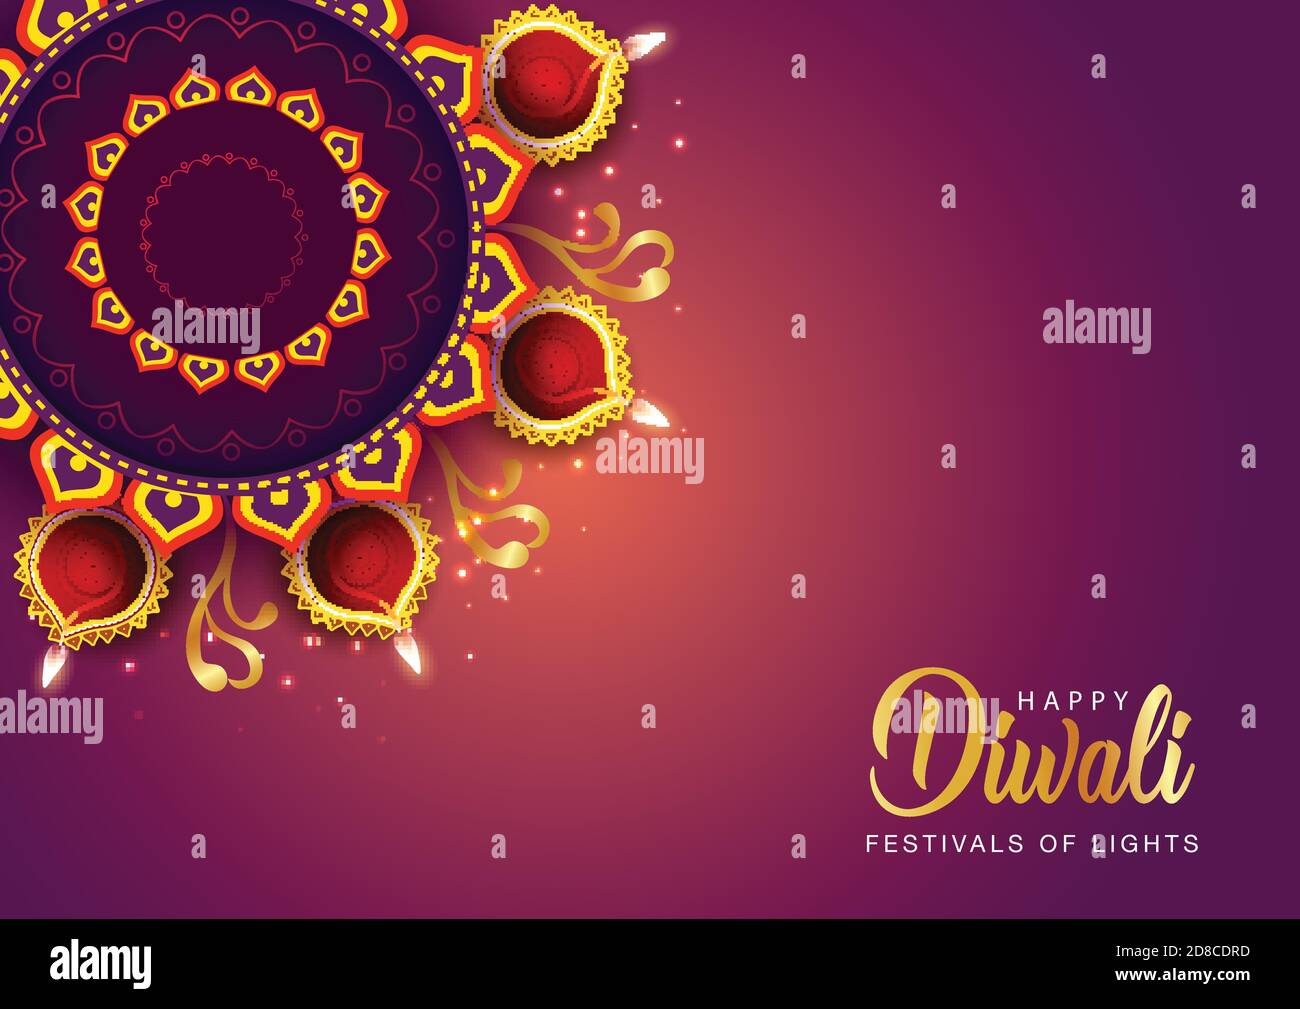 Happy Diwali celebration background. Top view of banner design decorated with illuminated oil lamps on patterned stylish background. vector illustrati Stock Vector